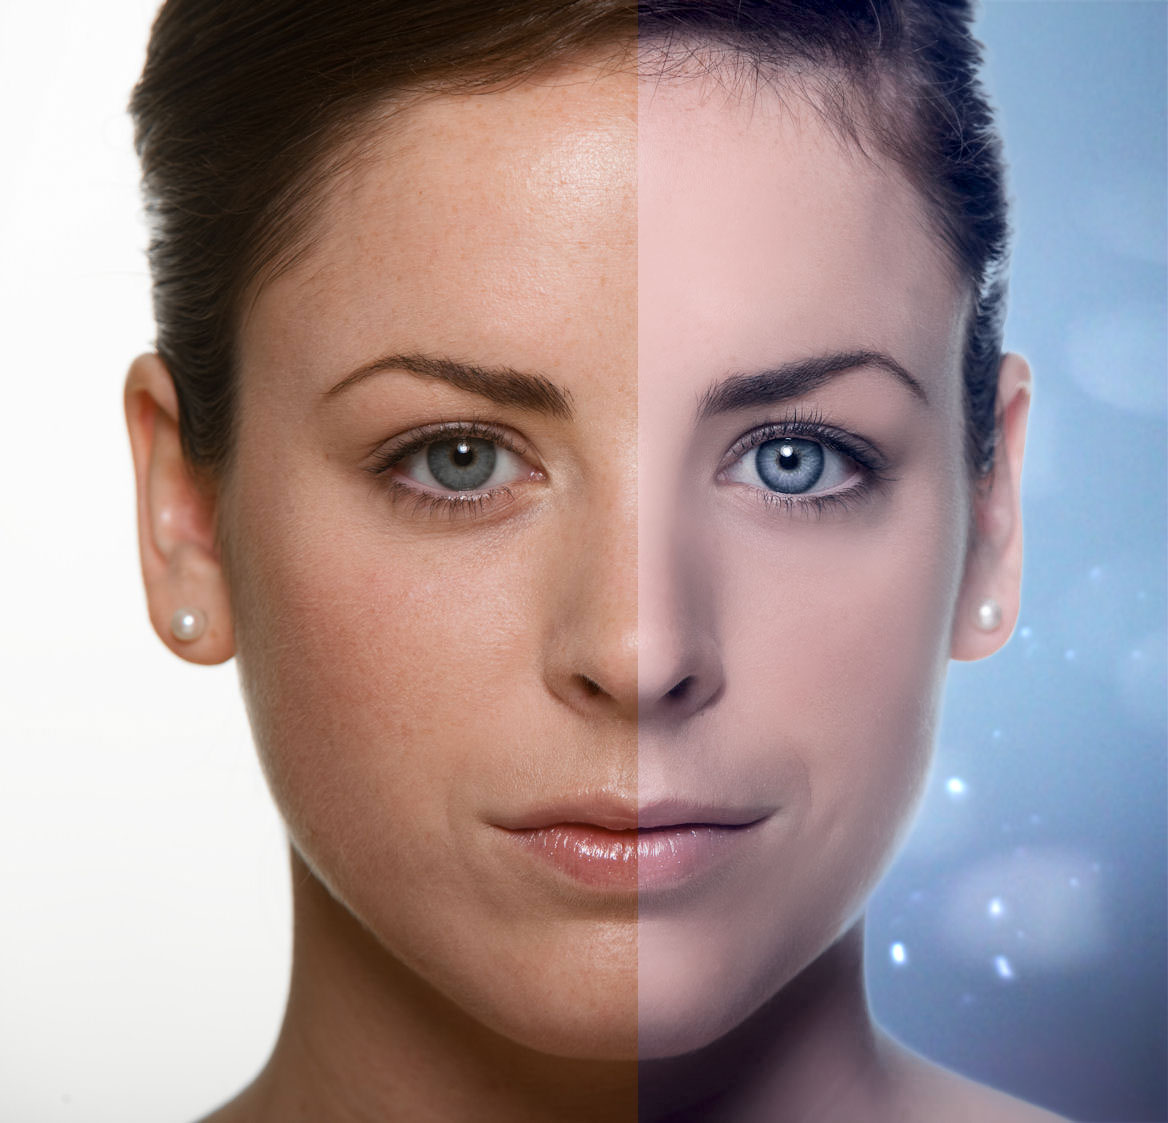 Retouch a face with Photoshop